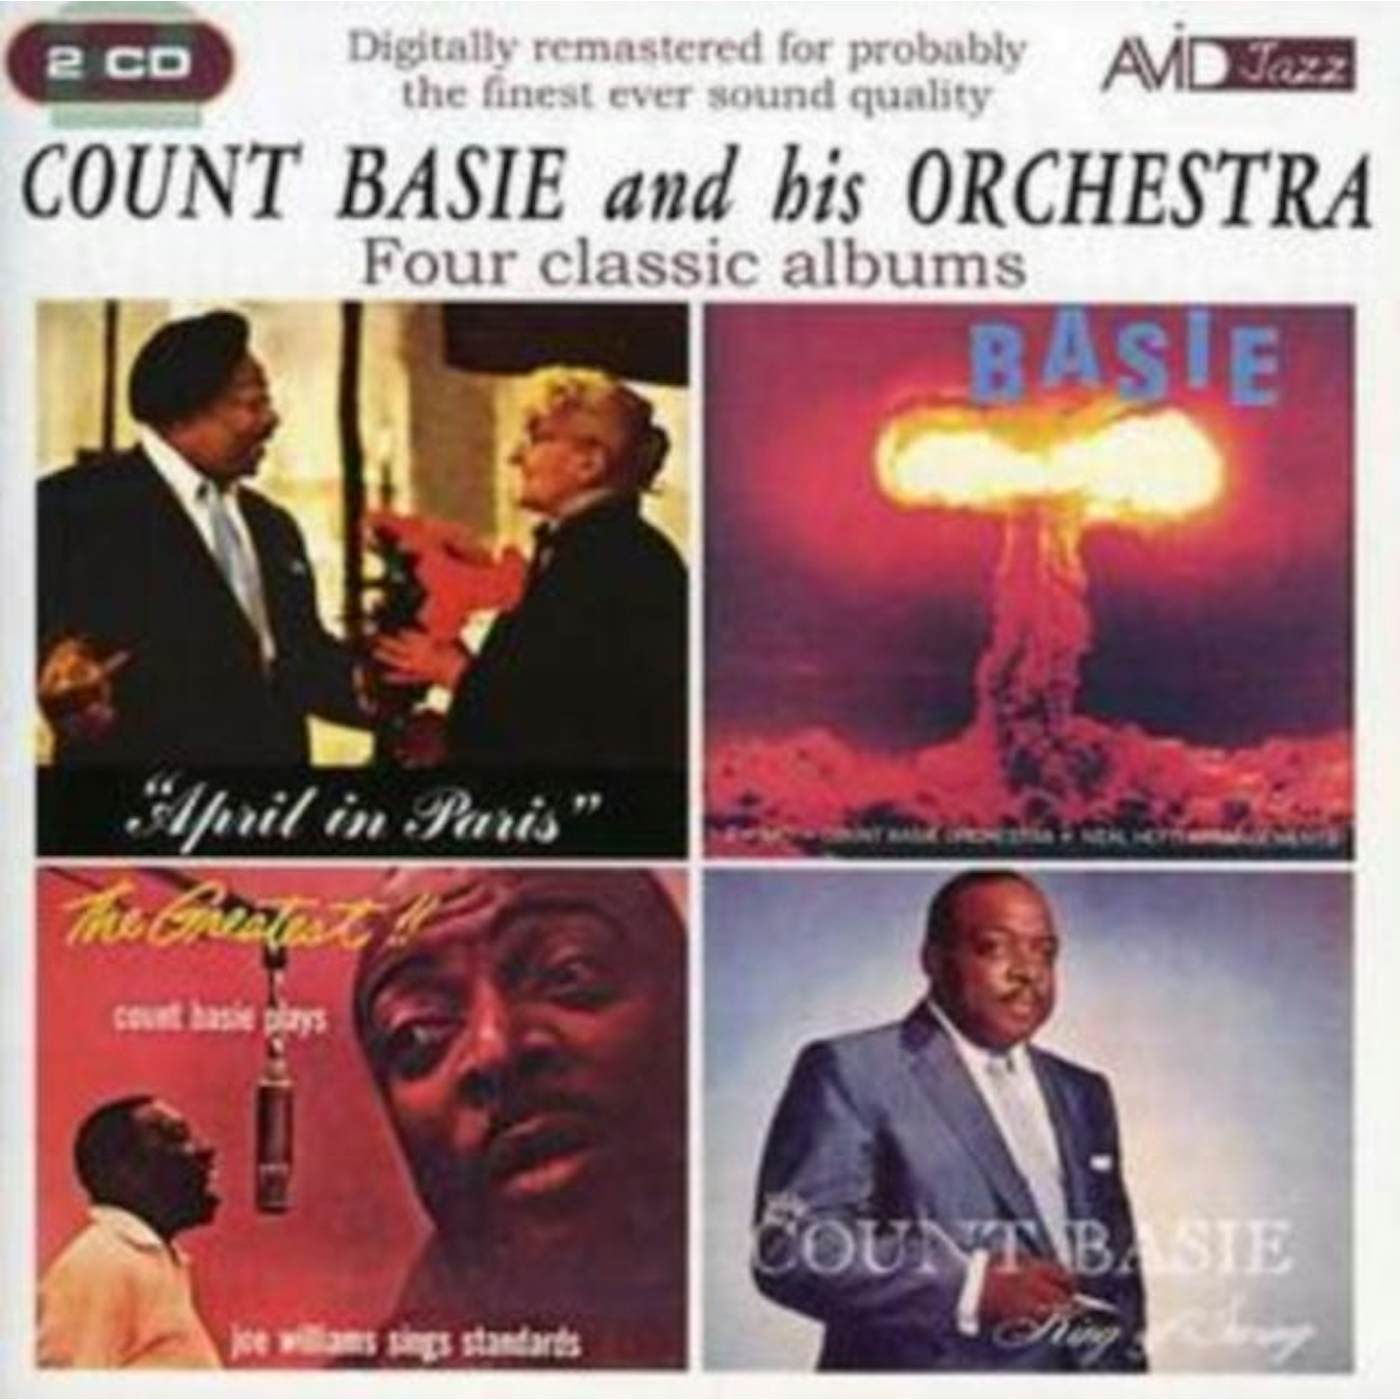 Count Basie CD - Four Classic Albums (April In Paris / King Of Swing / The Atomic Mr Basie / The Greatest! Count Basie Plays. Joe Williams Sings)